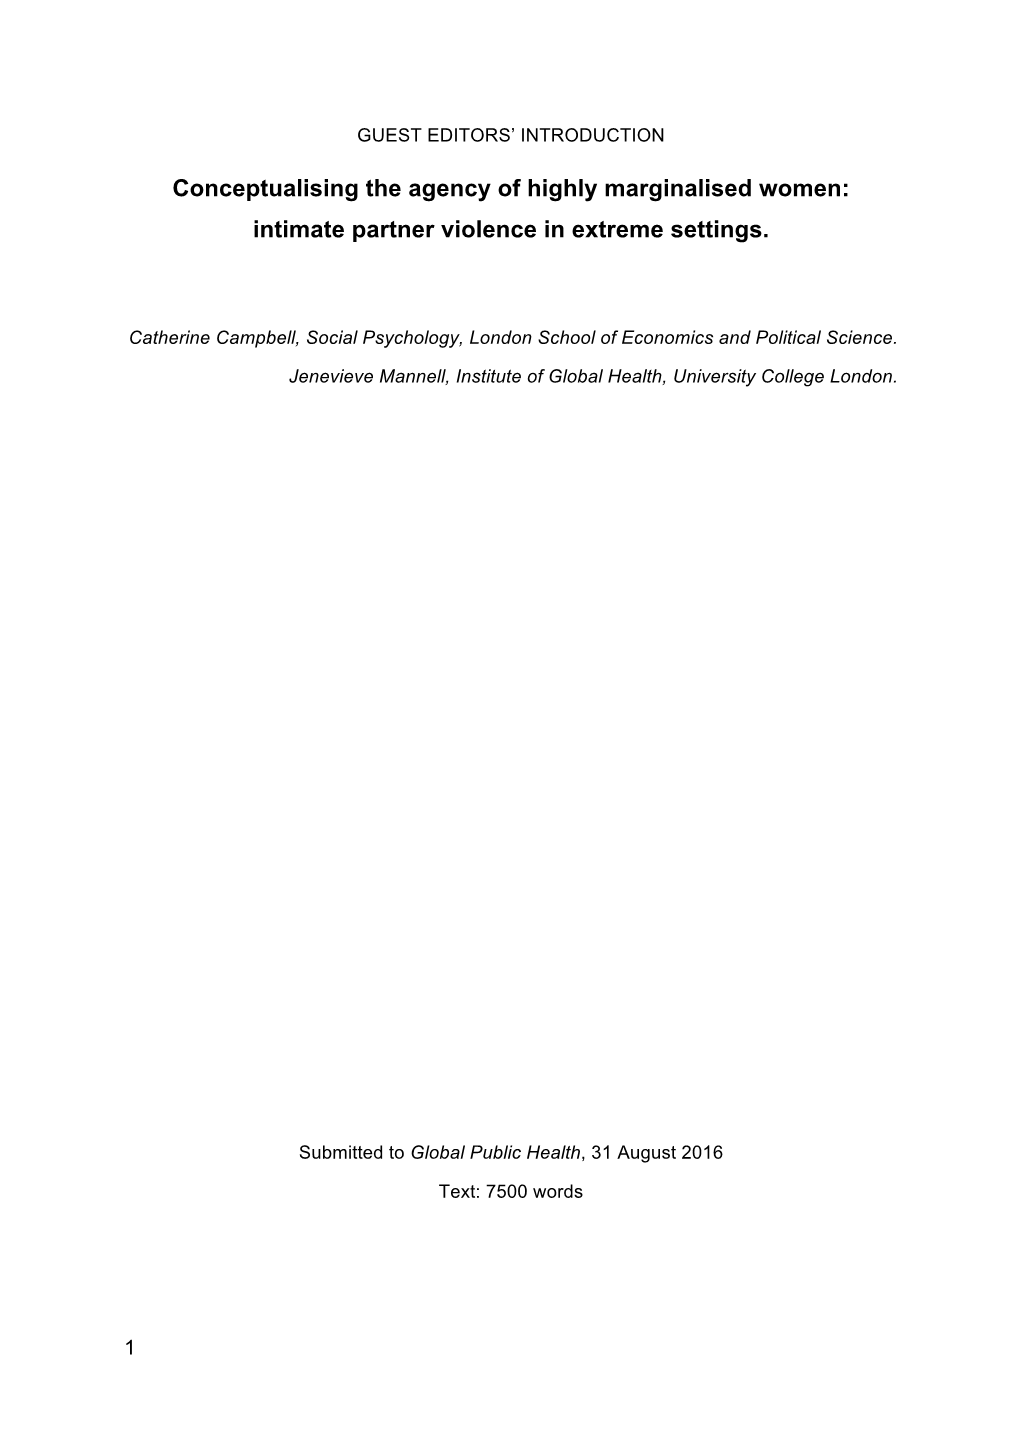 Conceptualising the Agency of Highly Marginalised Women: Intimate Partner Violence in Extreme Settings